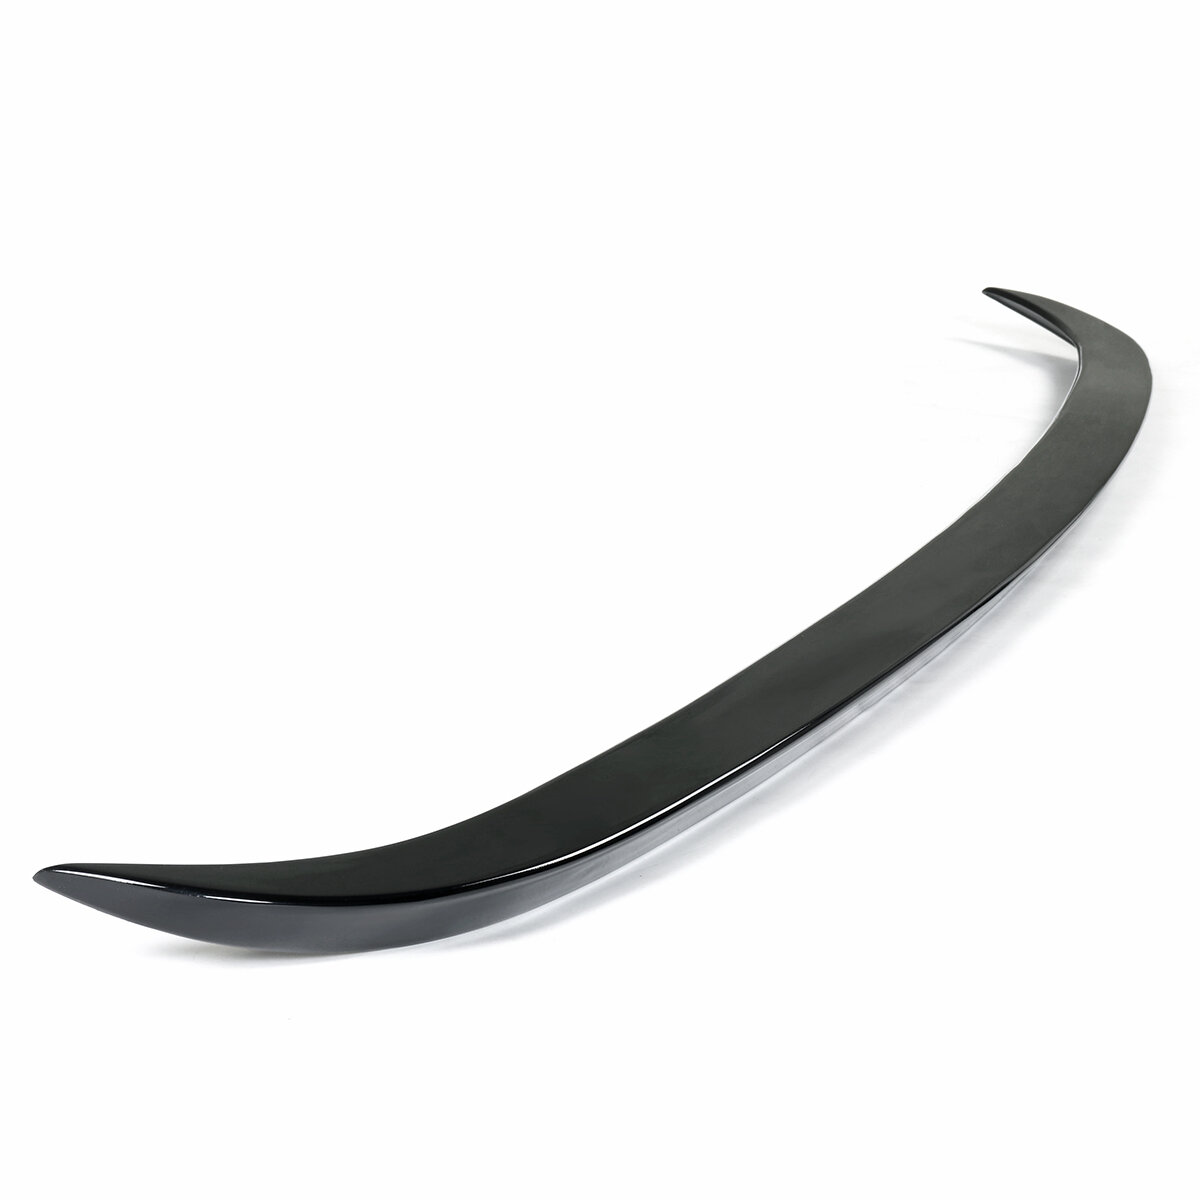 Painted Glossy Black Kofferbak Spoiler AC Style Voor BMW E60 5 Serie 2004-2010